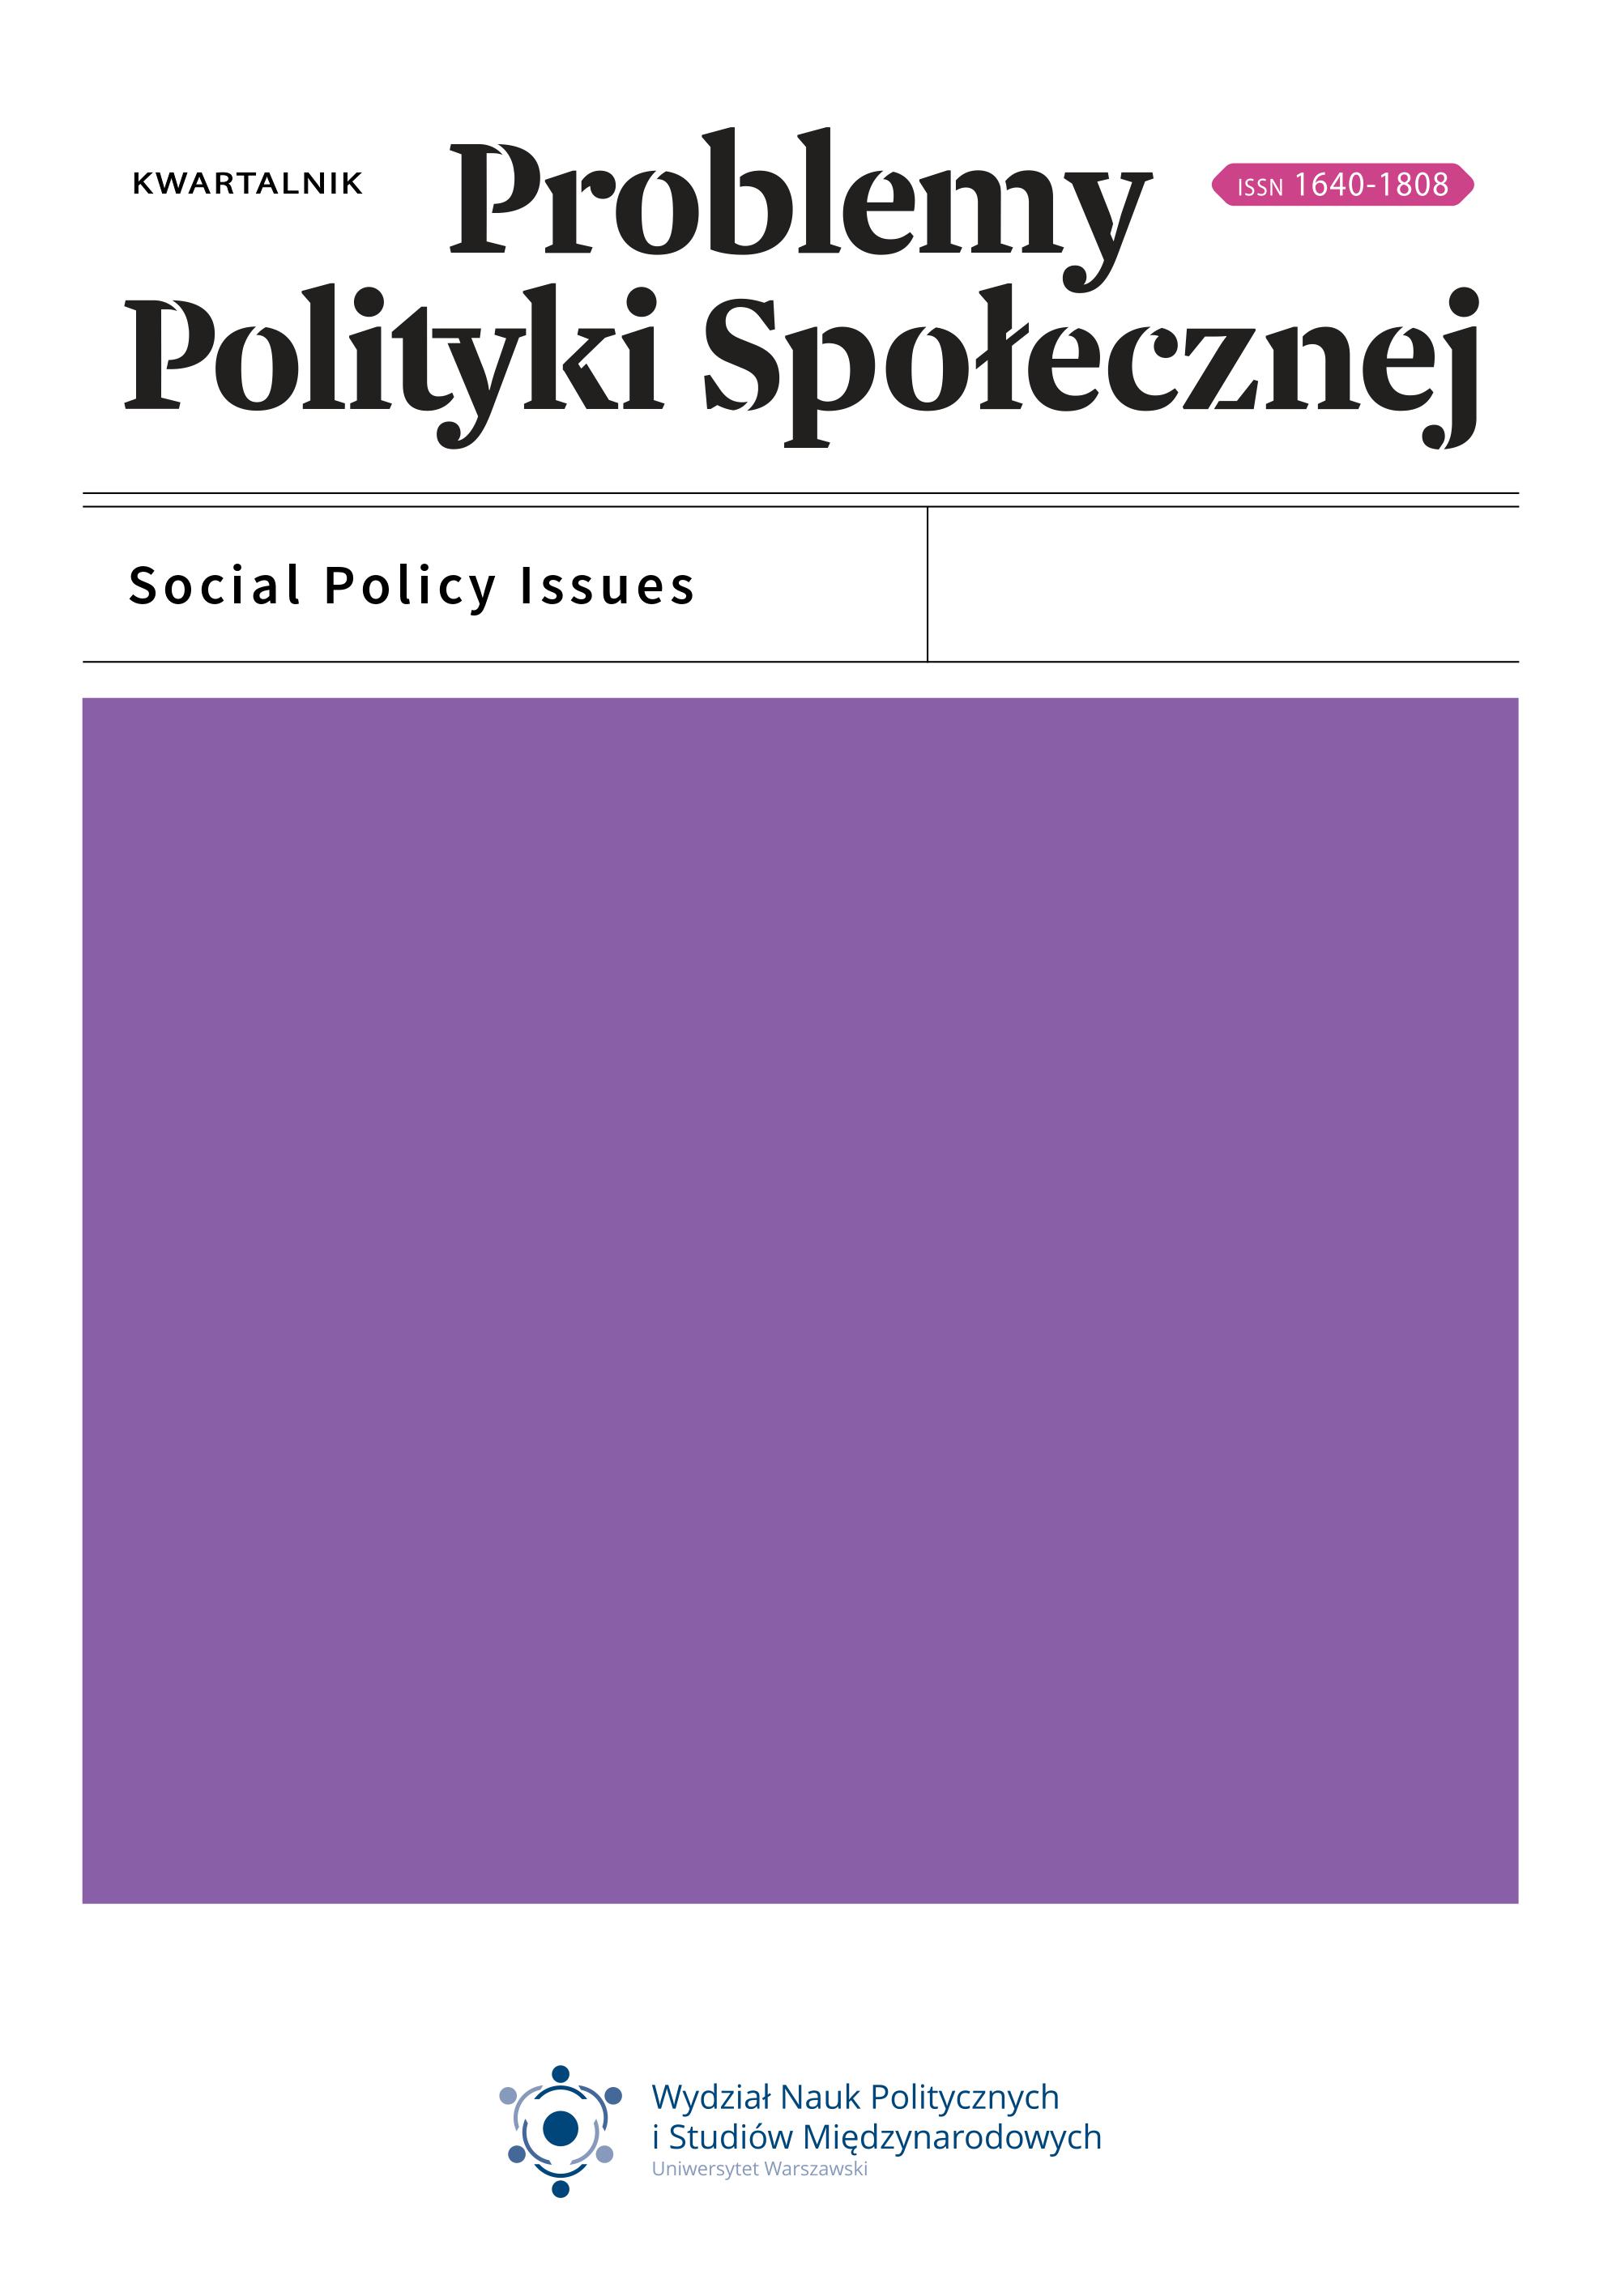 Welfare state agenda of successful populist parties in Czechia and Slovakia